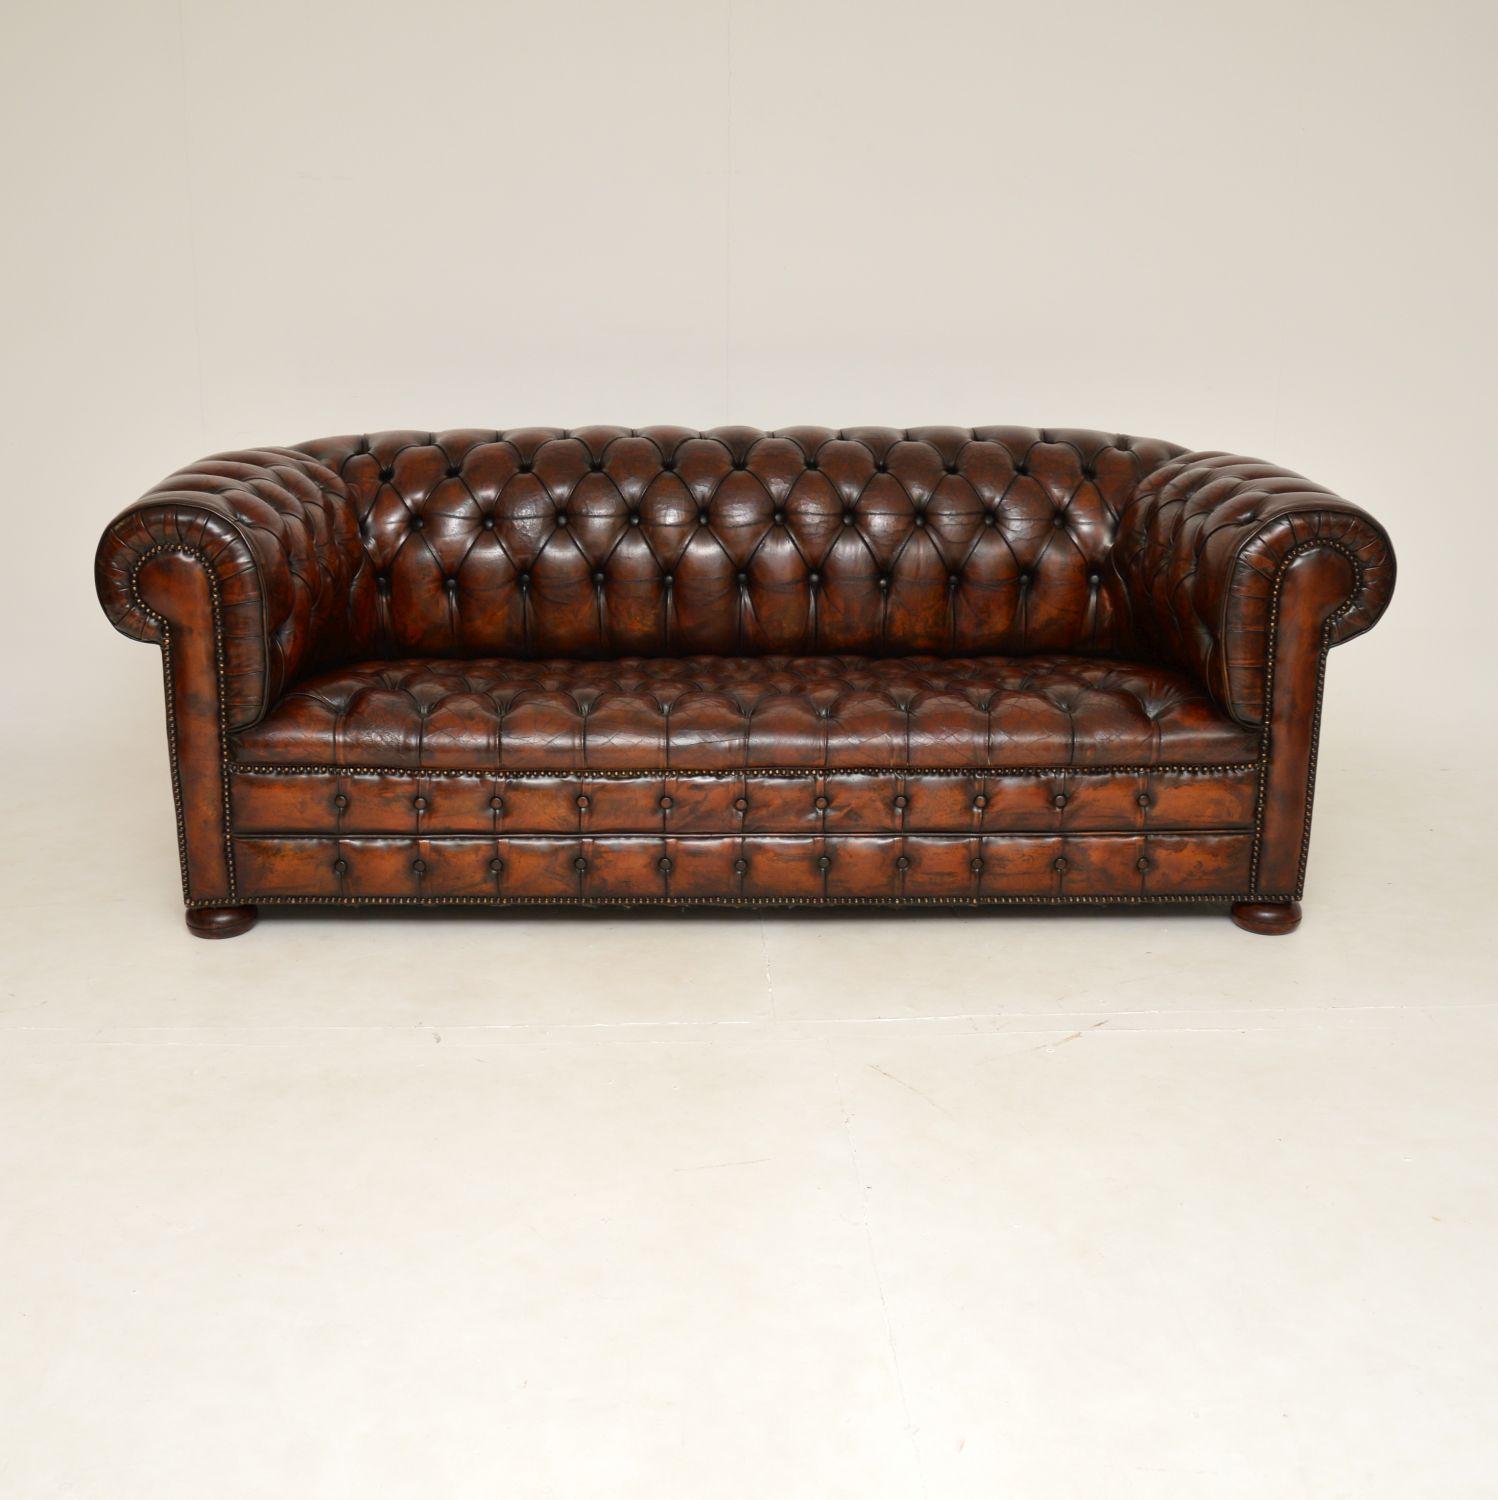 A magnificent antique deep buttoned leather Chesterfield sofa of the highest order. This was made in England, it dates from around the 1930’s.

The quality is outstanding, this is very well built and heavy. It has a bold shape, is comfortable and